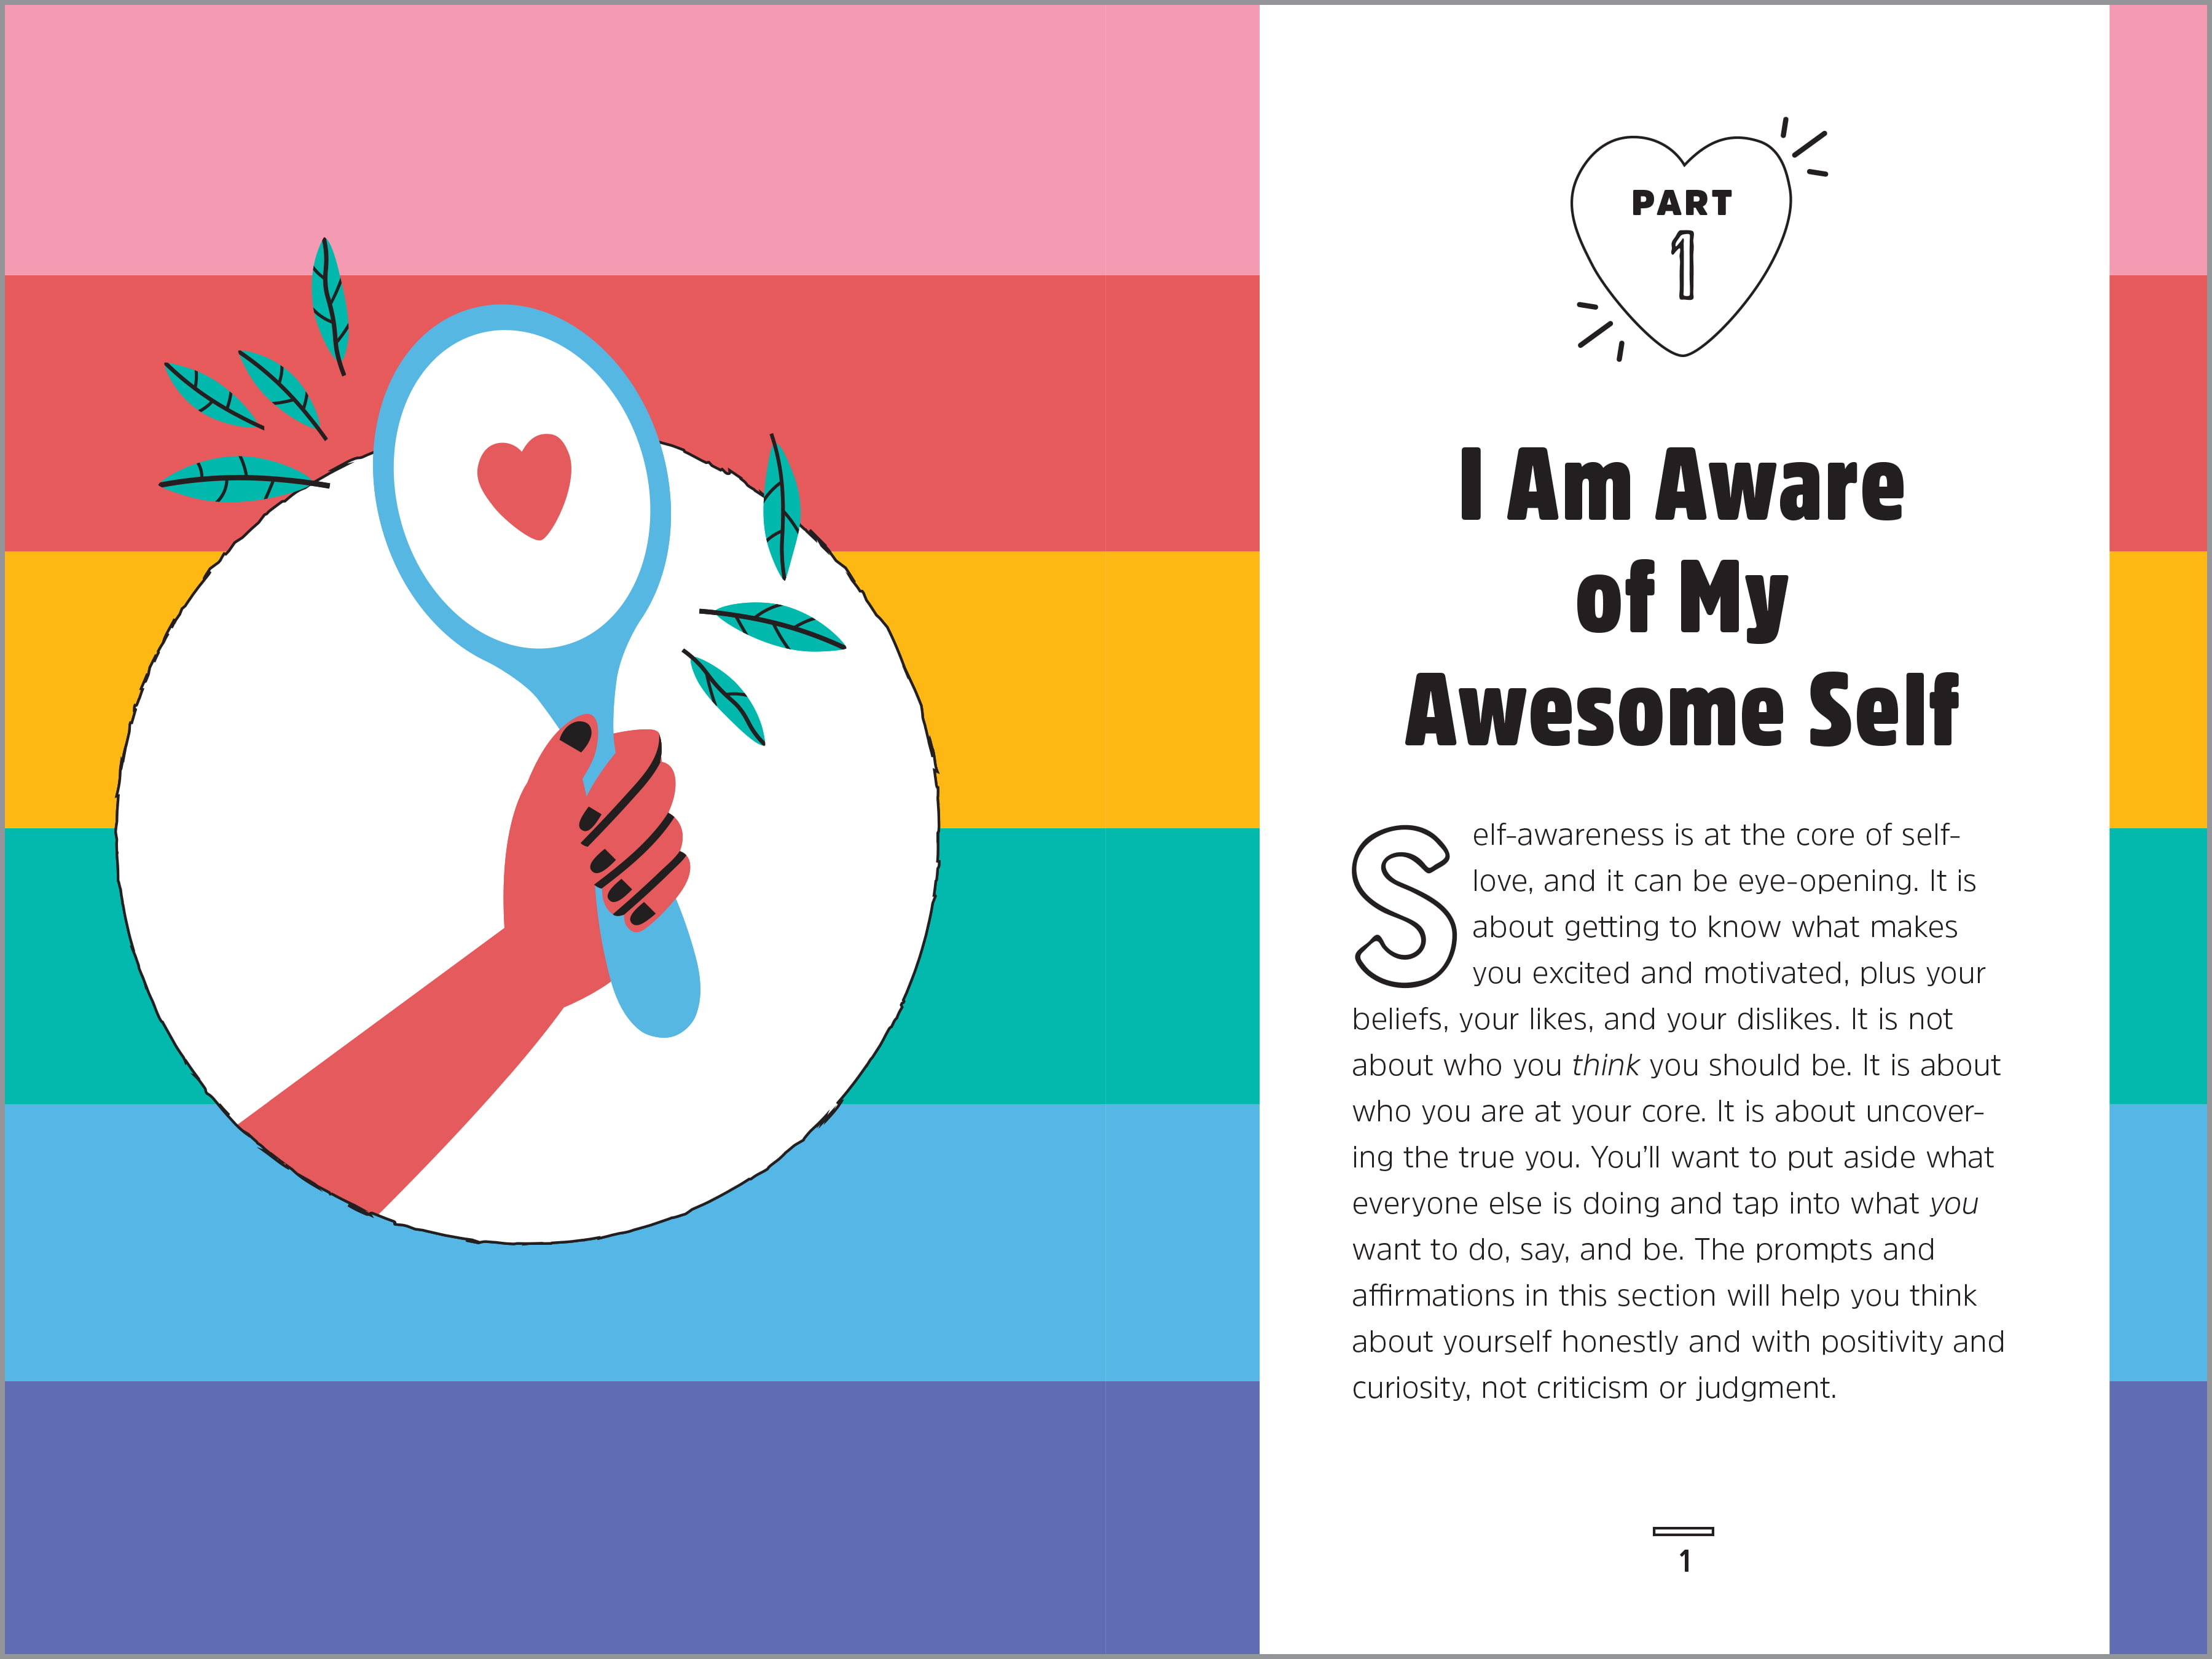 The Self-Love Journal for Teen Girls: A Fun and Empowering Journal to Build Confidence and Cultivate Self-Awareness, Self-Love, Self-Care and Self-Growth : V [Book]